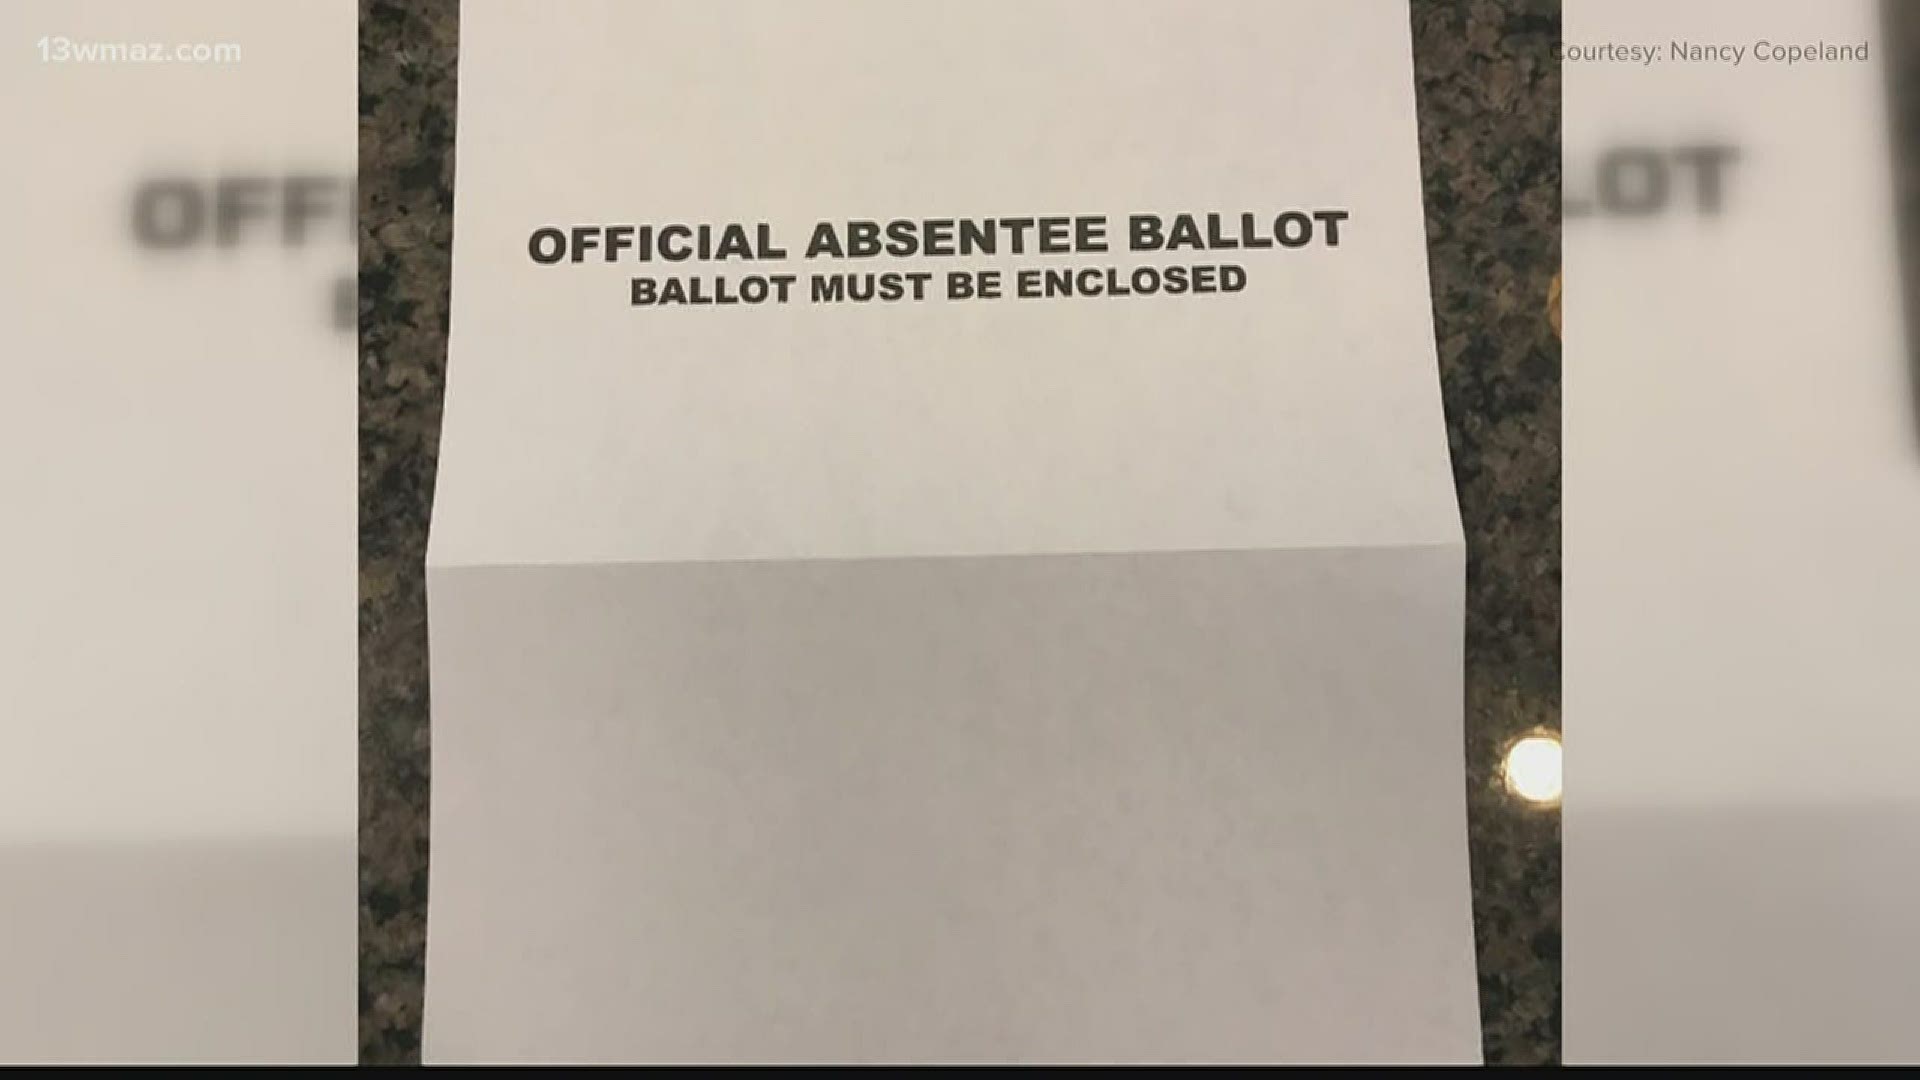 Instructions say to seal the absentee ballot in a white envelope. Instead, voters received a white piece of paper.